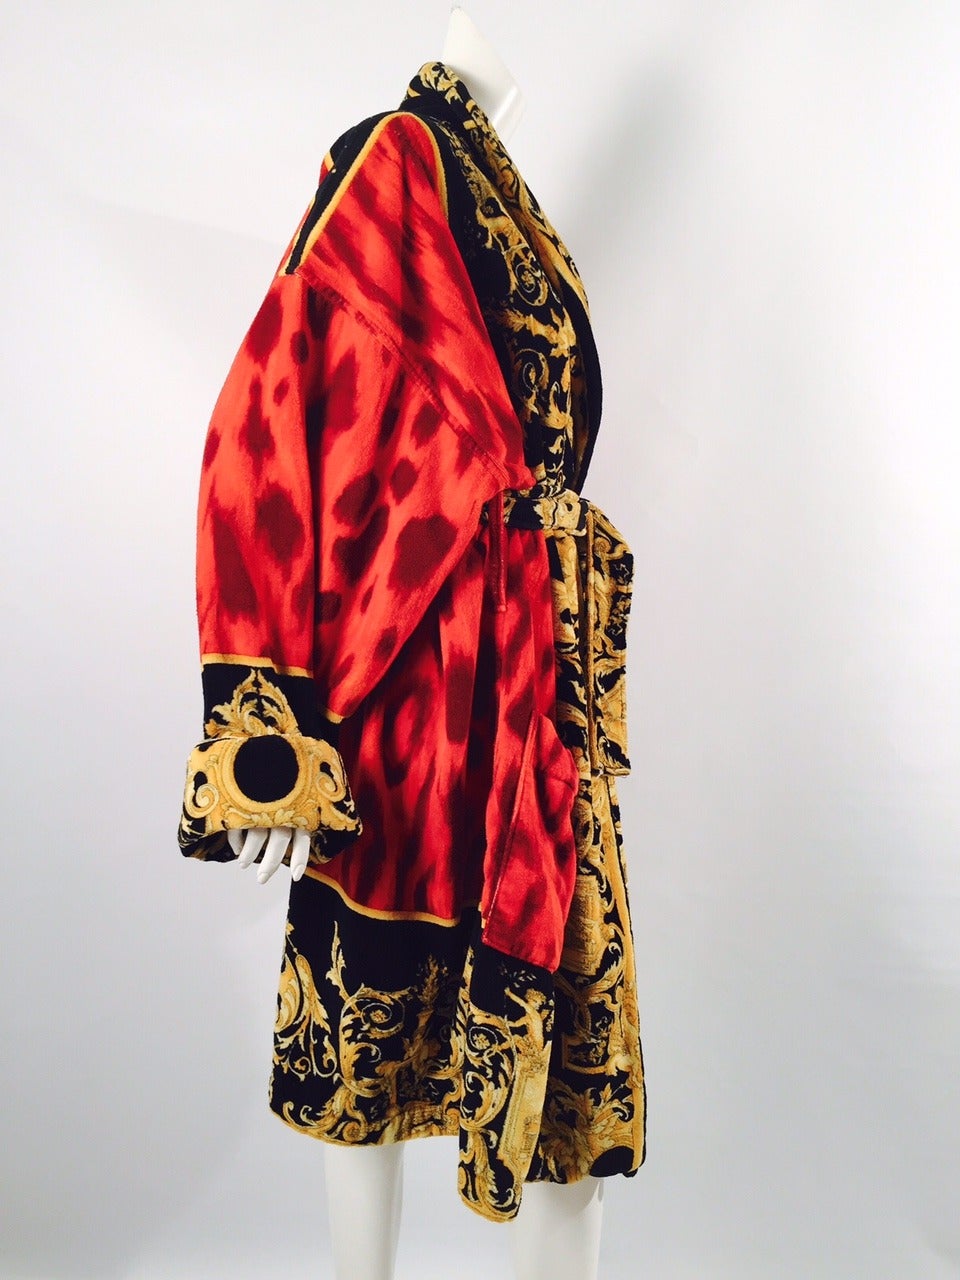 Vintage Gianni Versace Unisex Baroque Robe is a must for collectors of all things Versace!  Features ultra-luxurious cotton and signature print that incorporates playful cherubs and gilded scroll work!  Belted and perfect for a man or a woman.  Rich